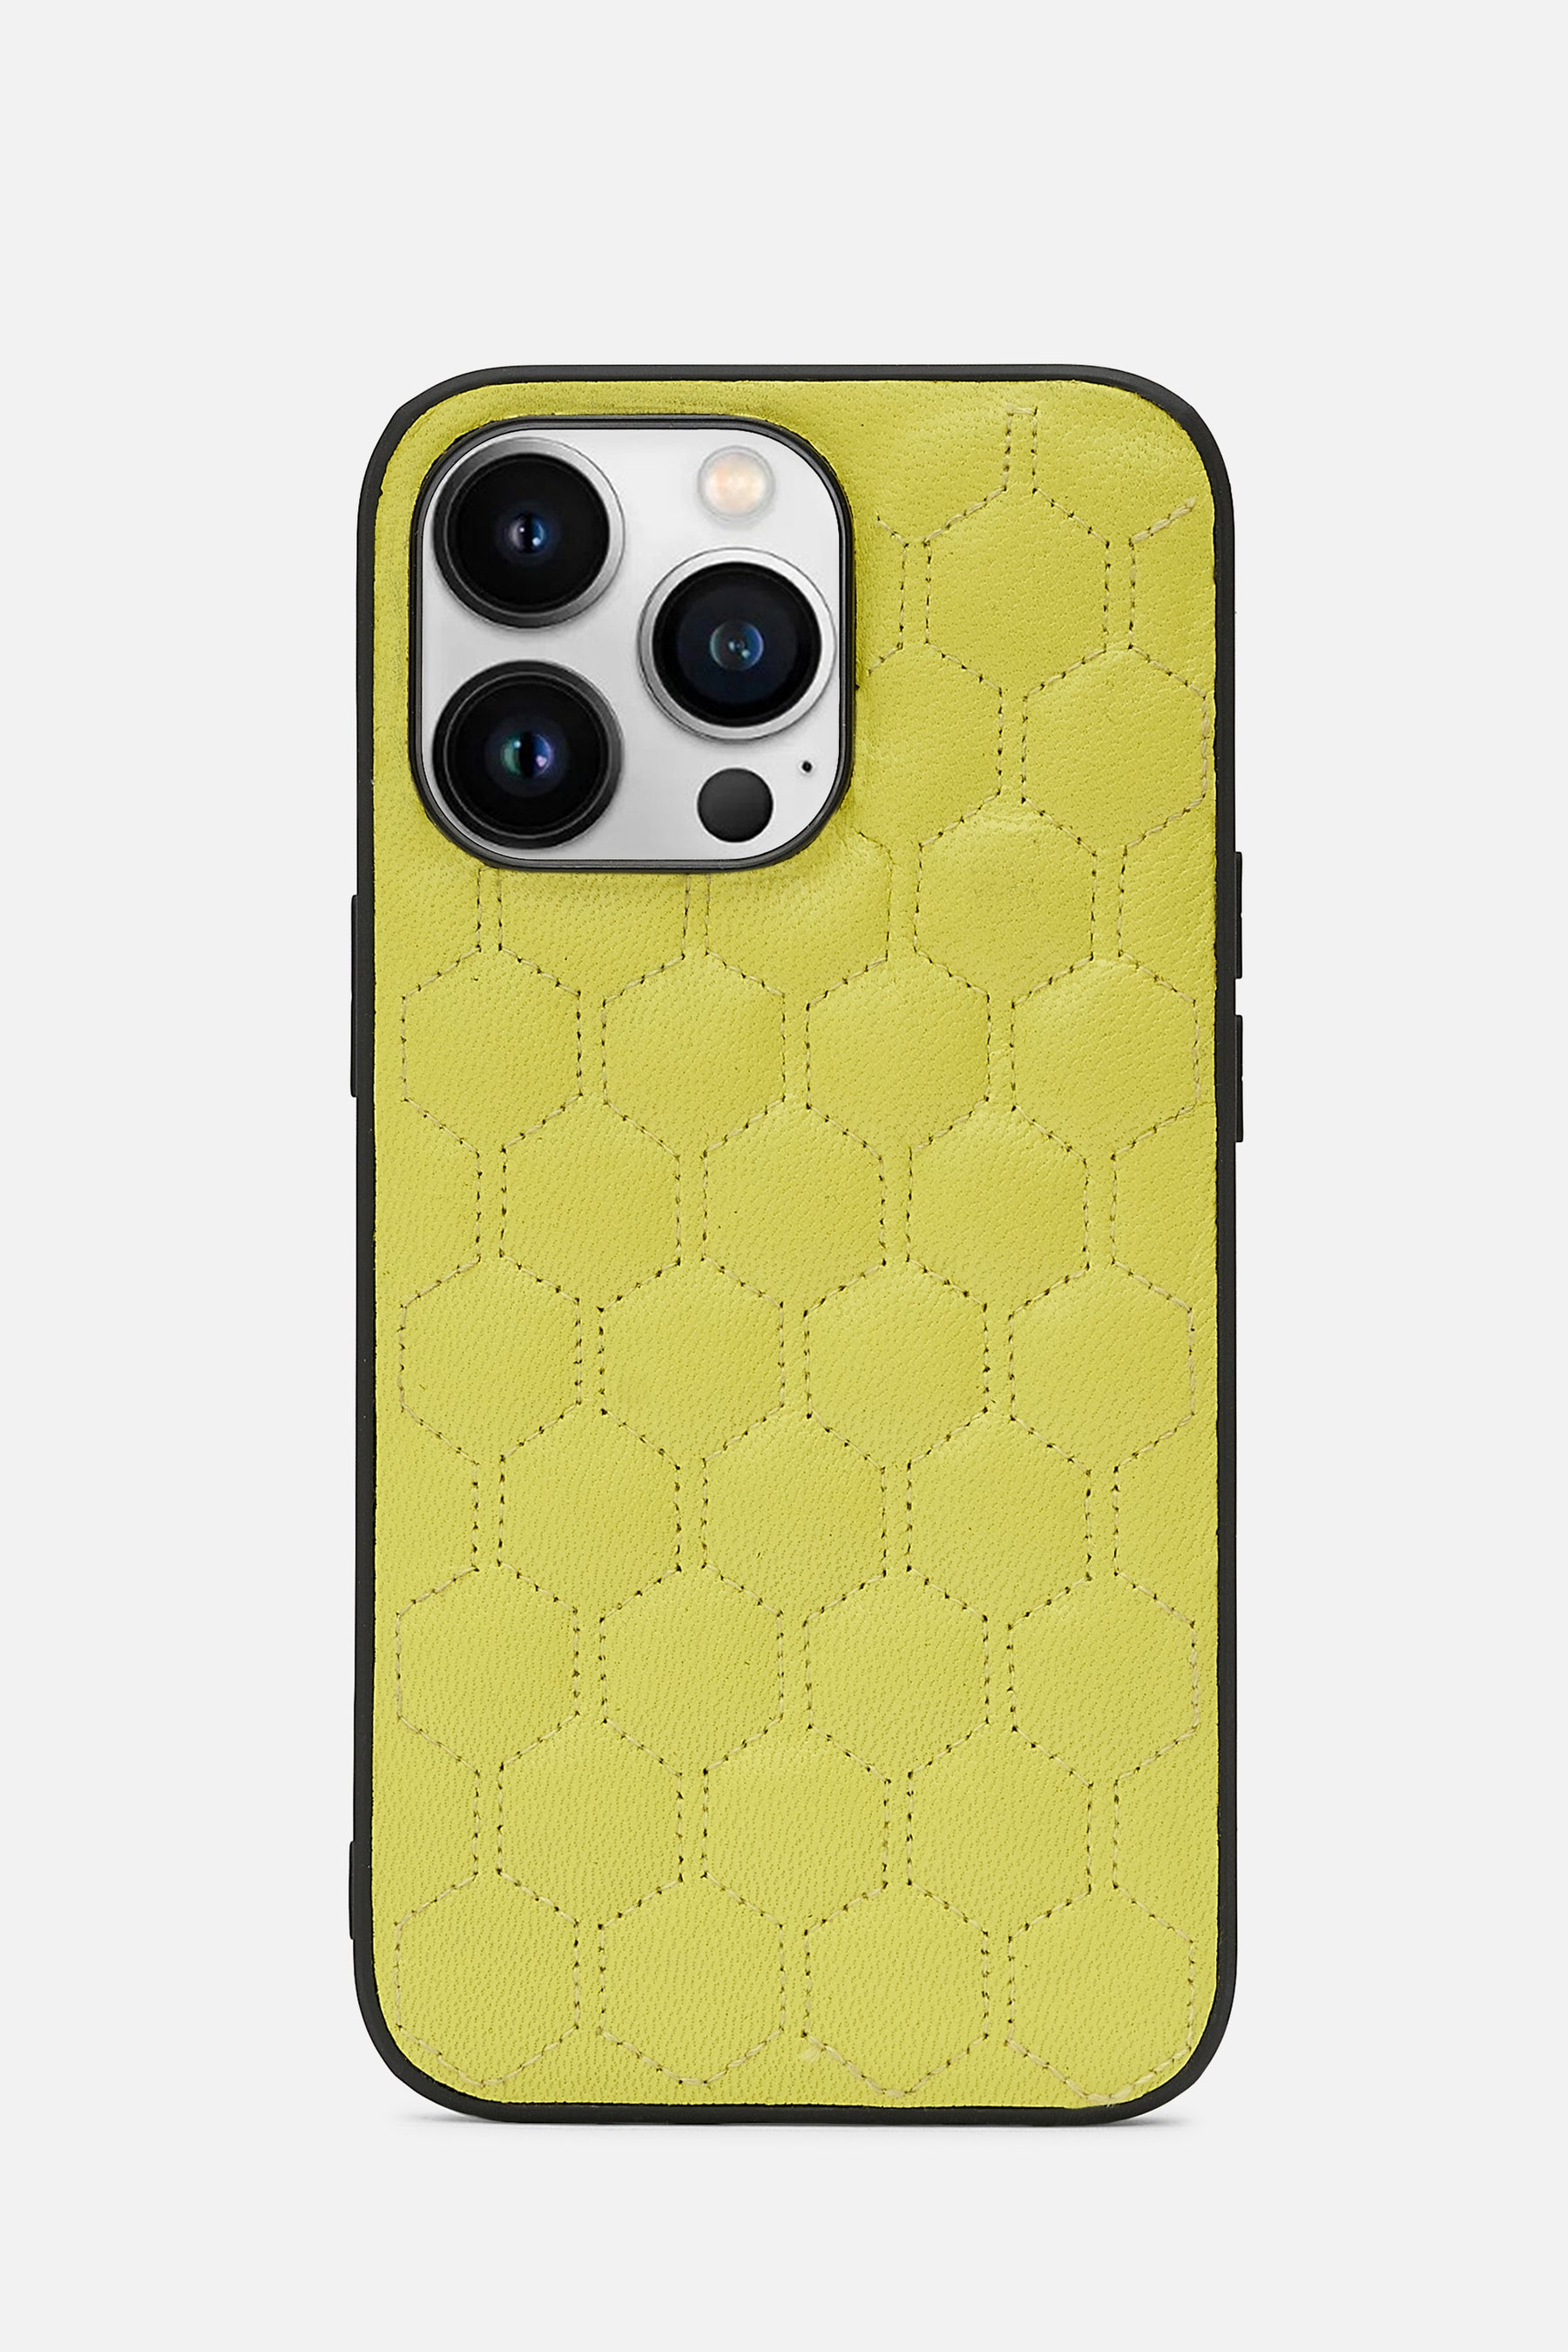 iPhone  Case - Honeycomb Quilting - Snapchat Yellow